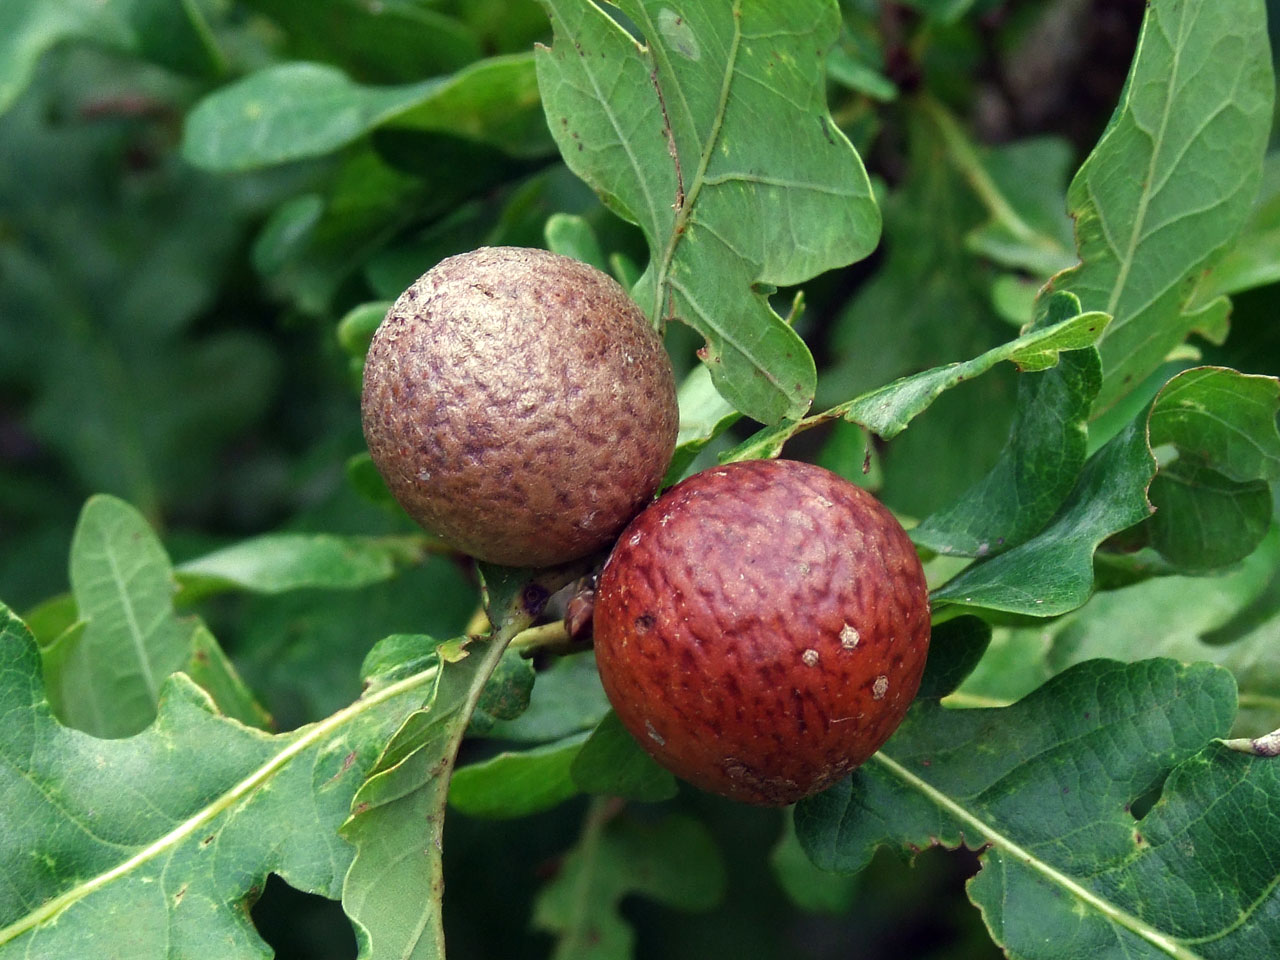 Oak tree leaves are often populated with this kind of spheres with worms live in this spheres